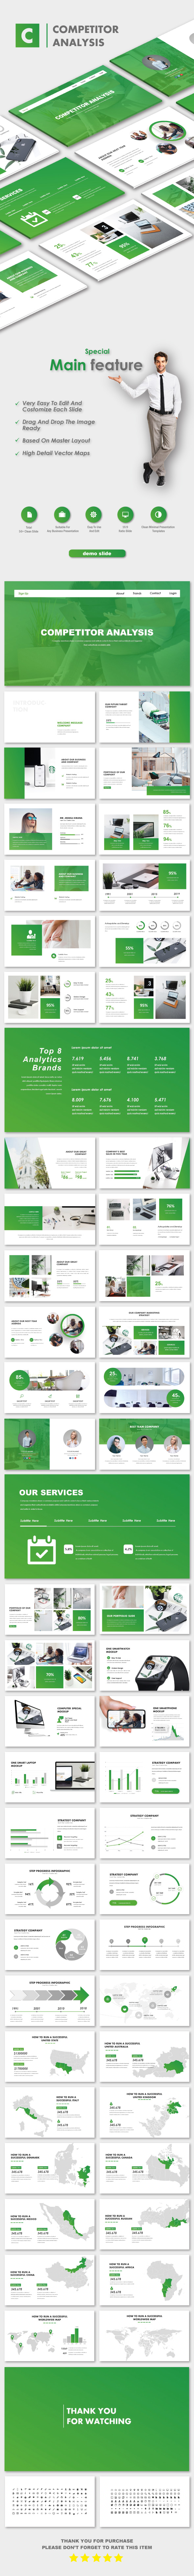 Competitor Analysis Business PowerPoint Templates